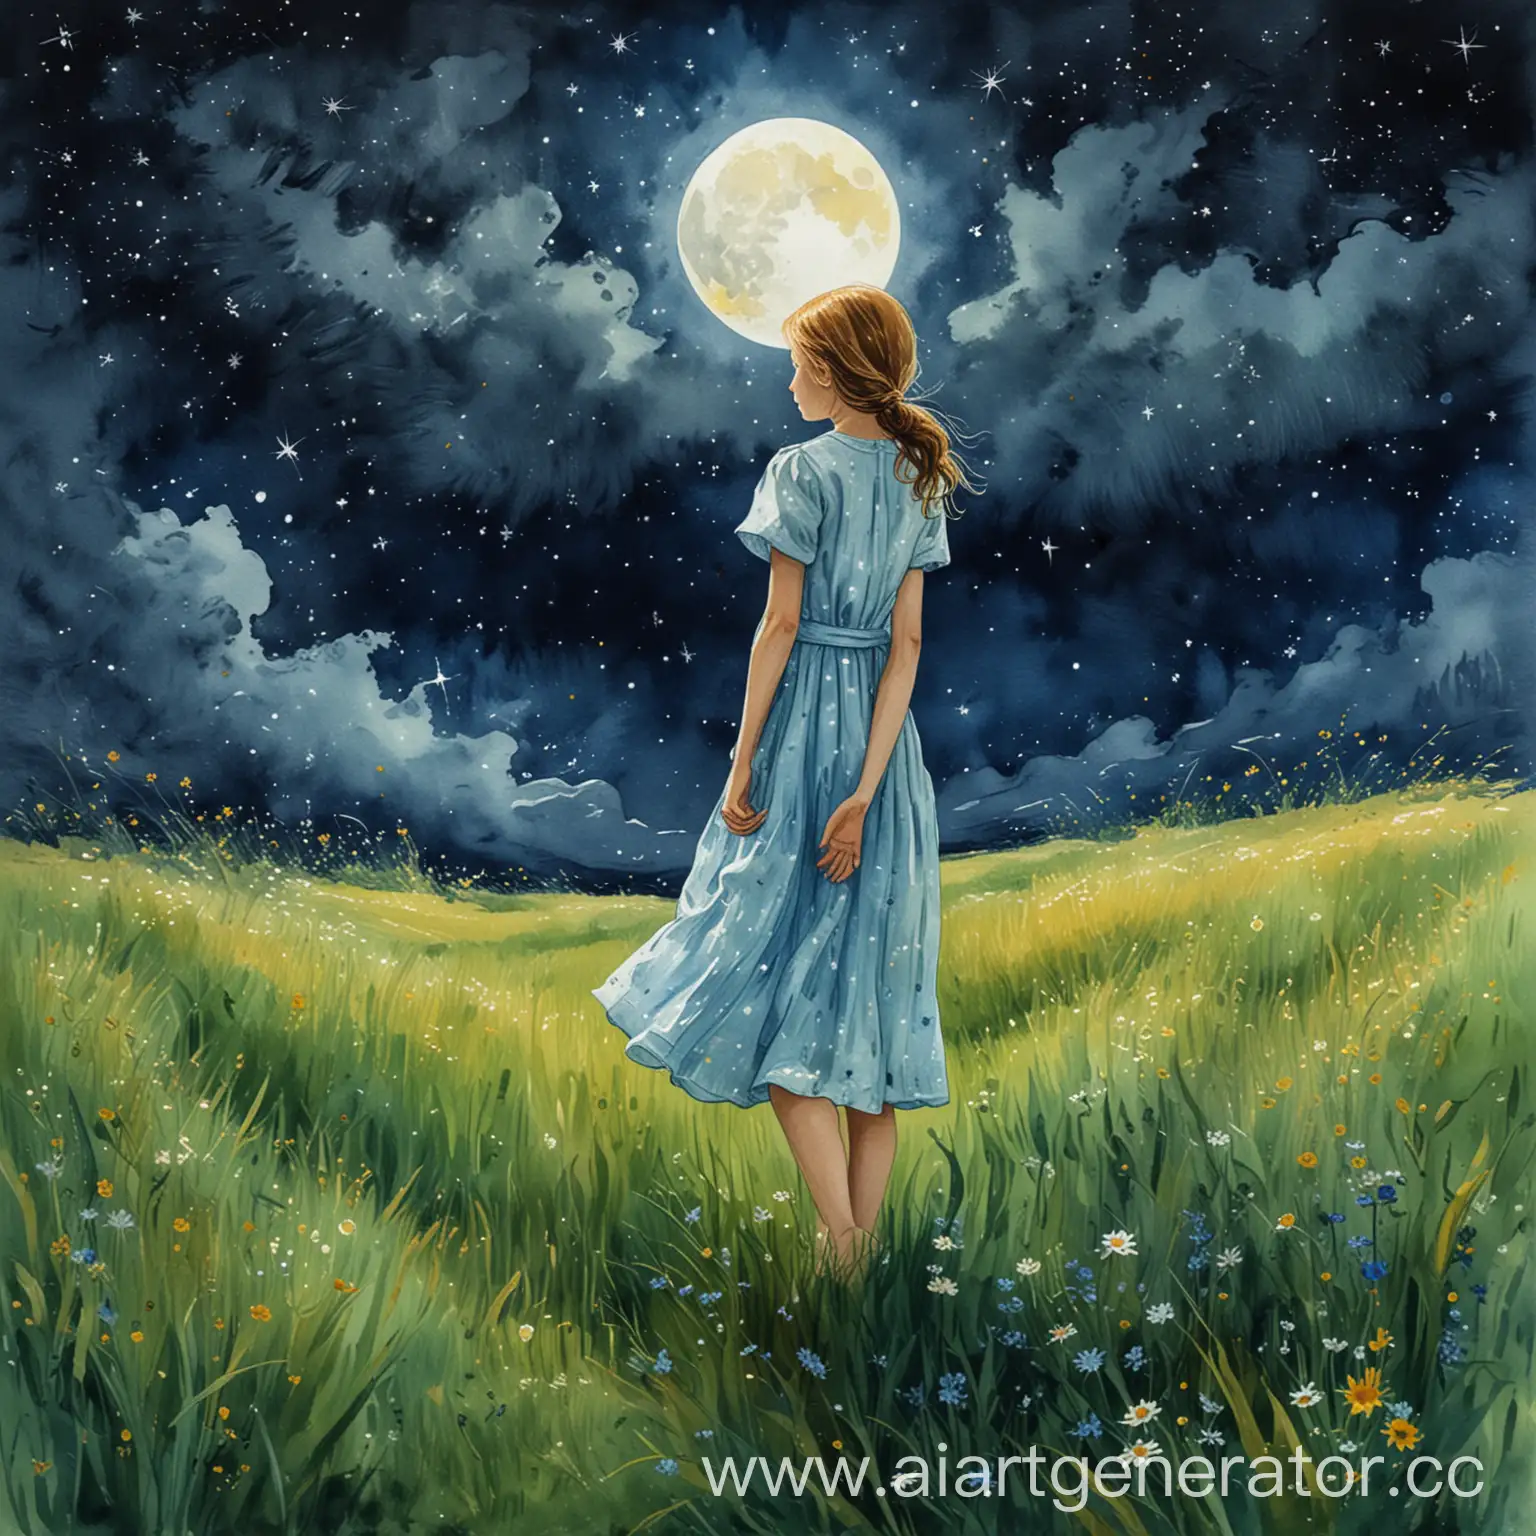 Girl-in-Summer-Dress-Gazing-at-Starry-Night-Sky-Van-Gogh-Style-Watercolor-Painting